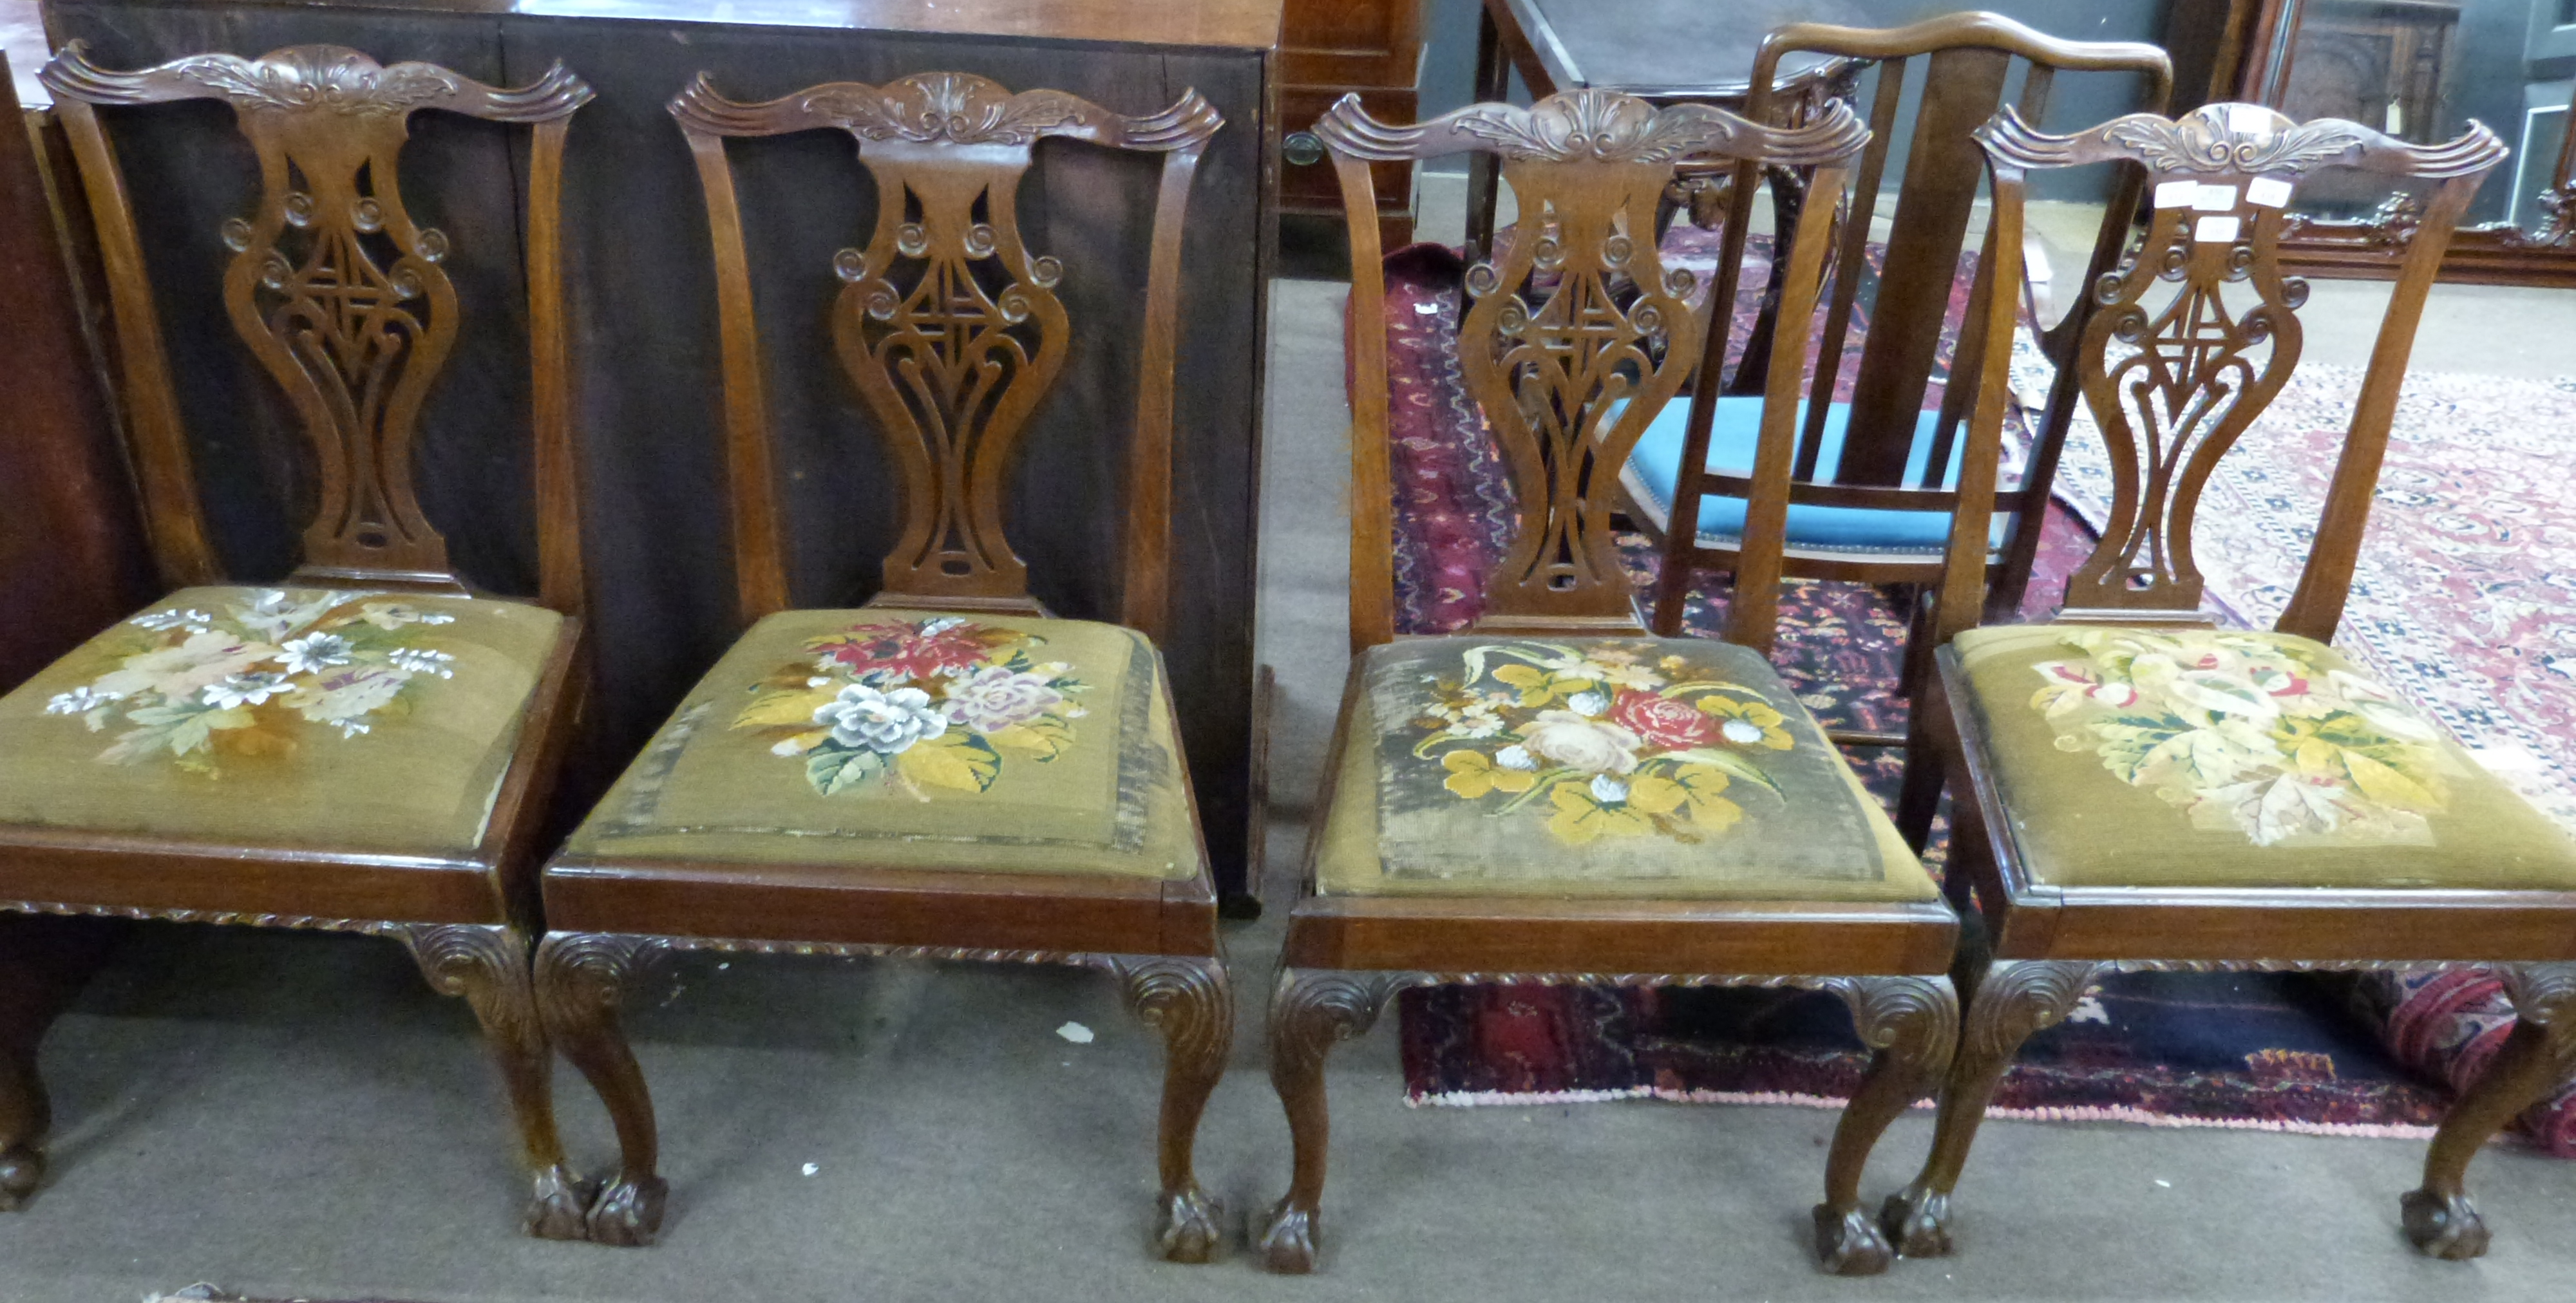 Set of 4 Chippendale style mahogany dining chairs, elaborate pierced splat backs, old tapestry